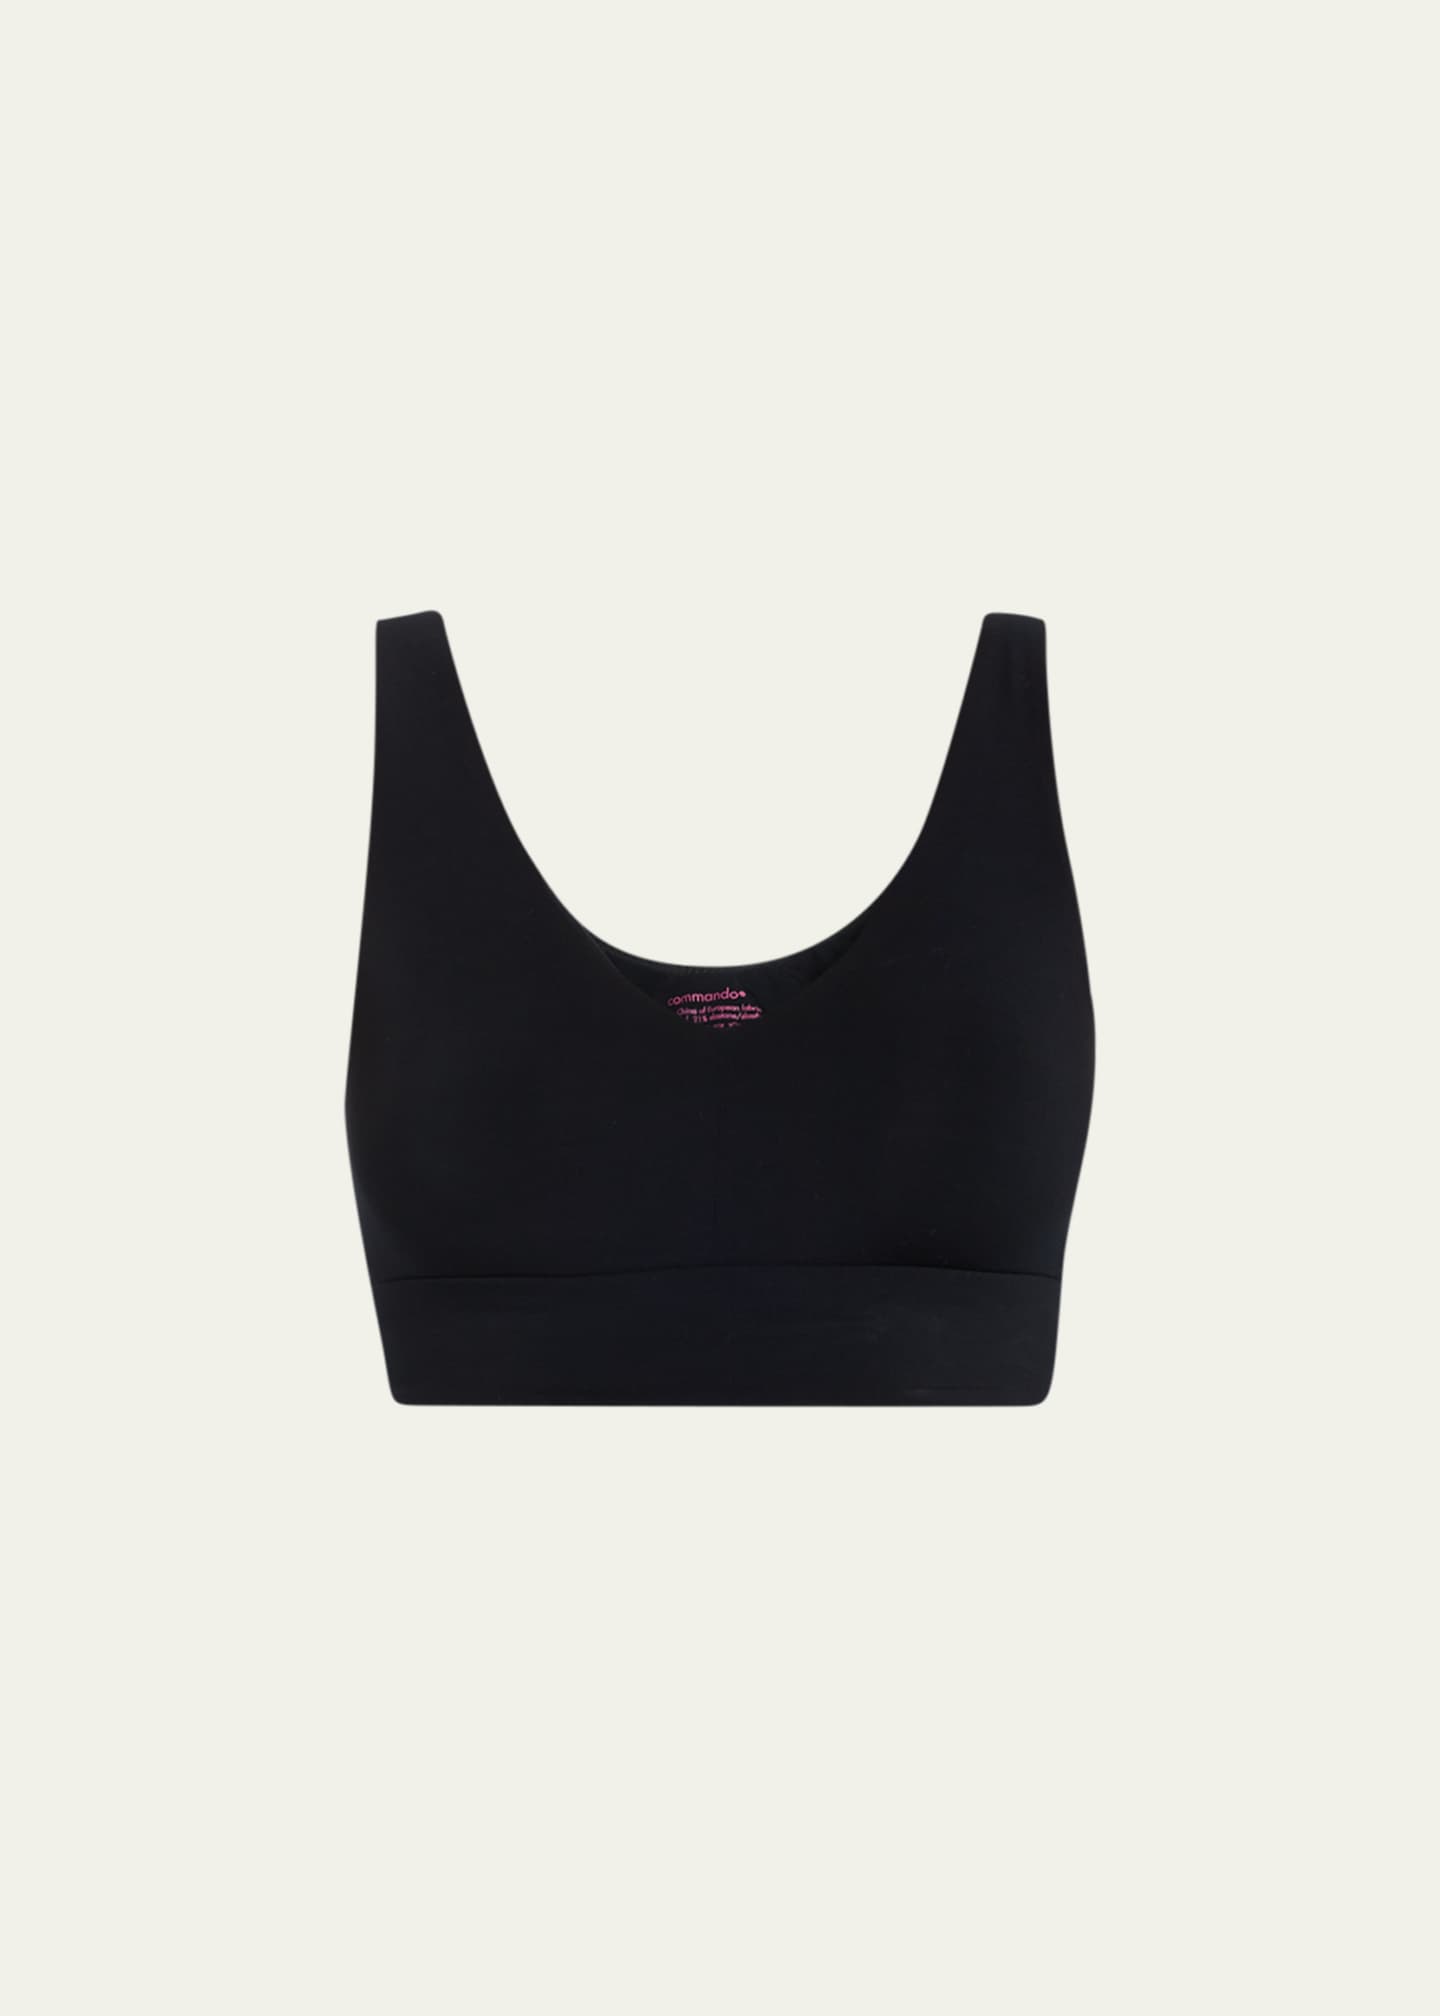 Commando Bras and Bralettes Sale, Up to 70% Off